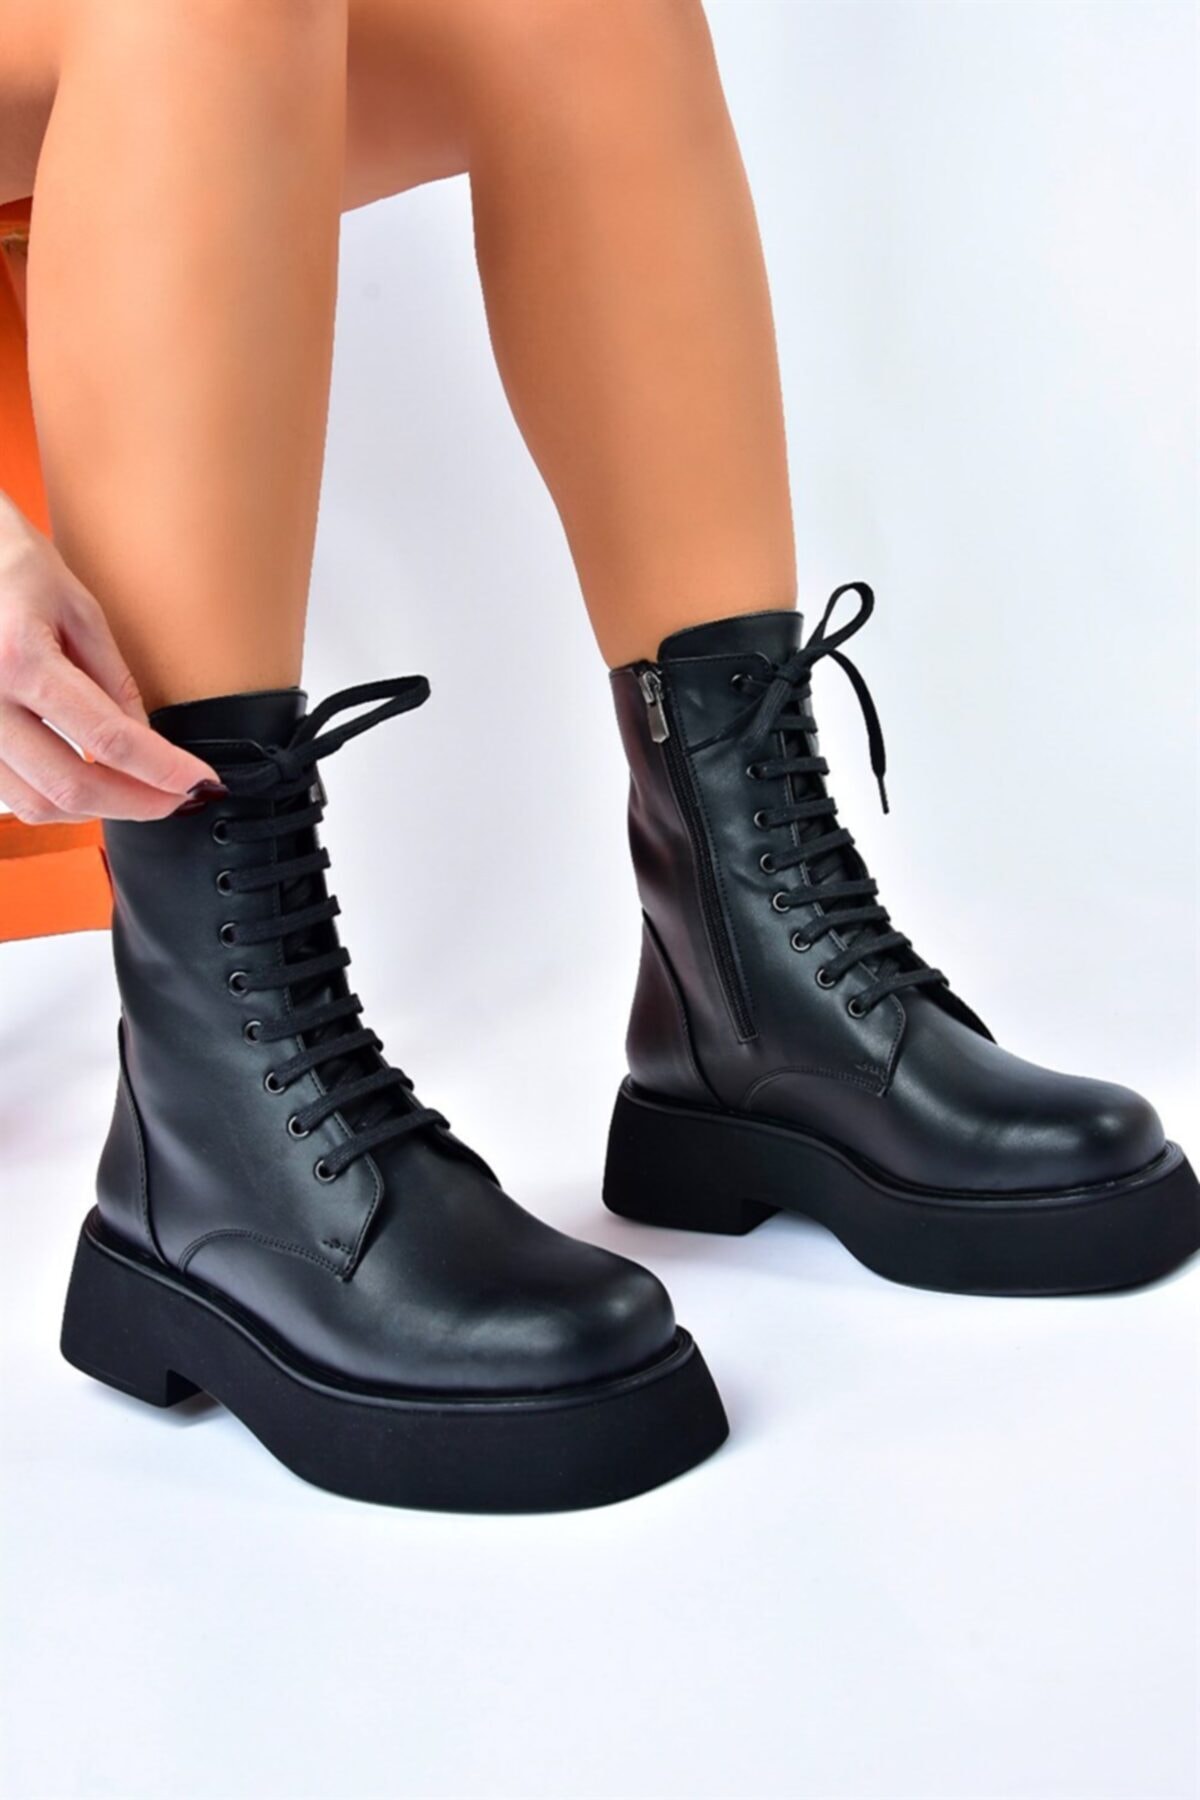 Levně Fox Shoes Black Thick-soled Women's Daily Boots Boots